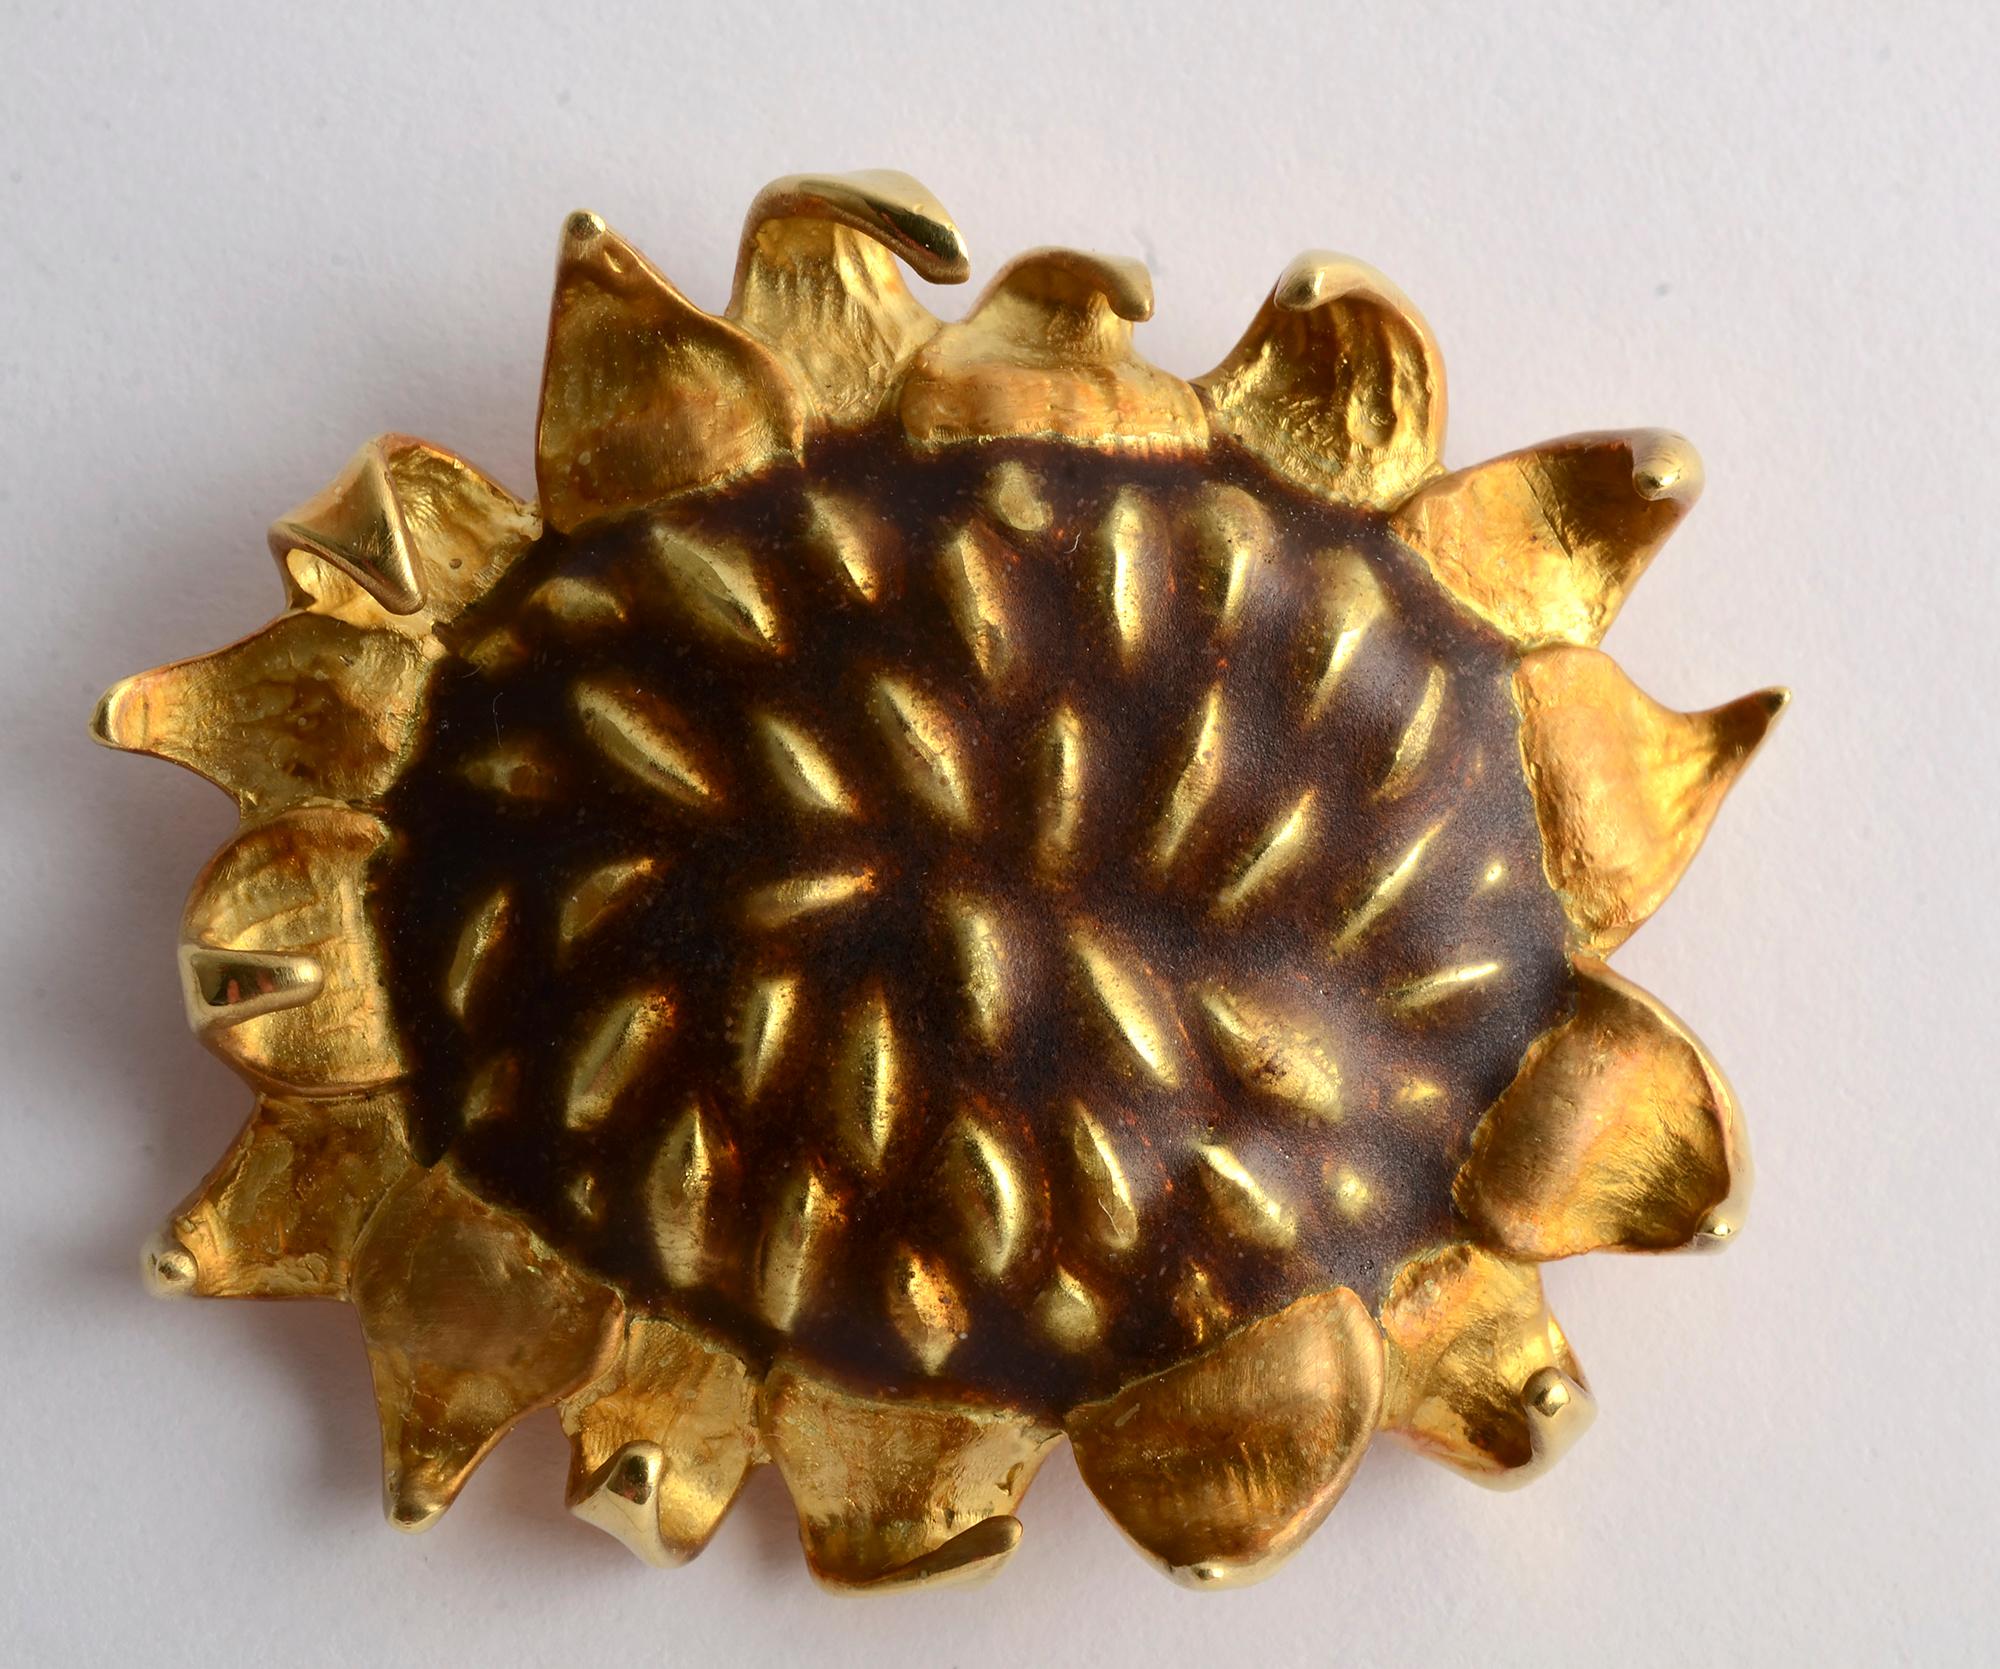 This 18 karat gold and enamel Sunflower brooch by Angela Cummings is wonderfully textured and dimensional. The height of the enamel floral center is intentionally irregular as are the triangular shaped petals. The brooch measures 1 5/8 inches in